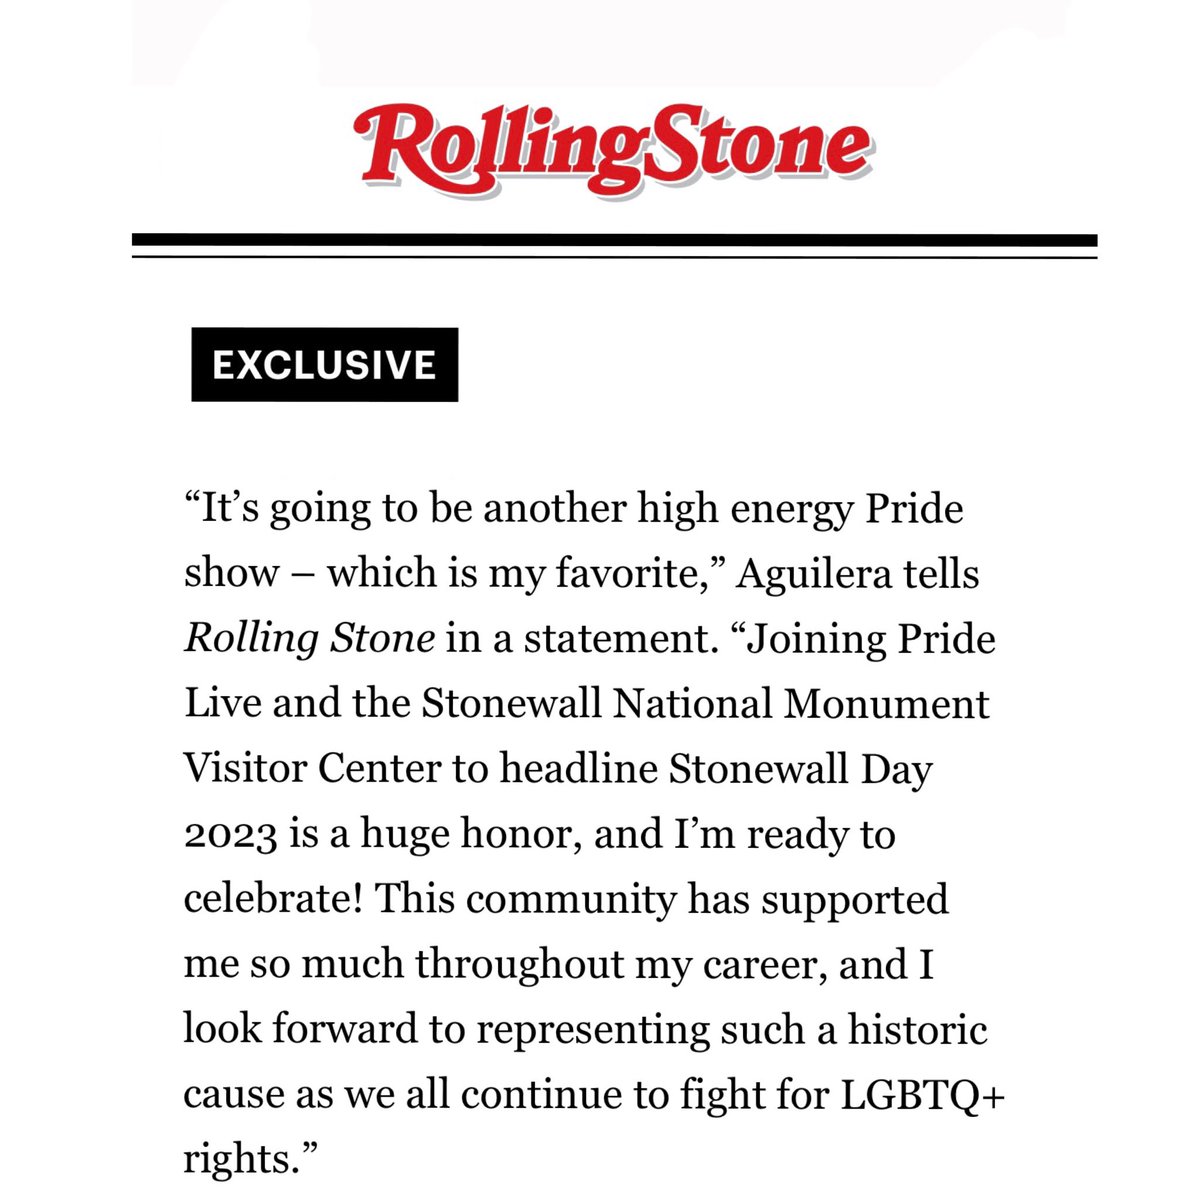 Christina Aguilera on headlining #StonewallDay2023 exclusively for RollingStone: